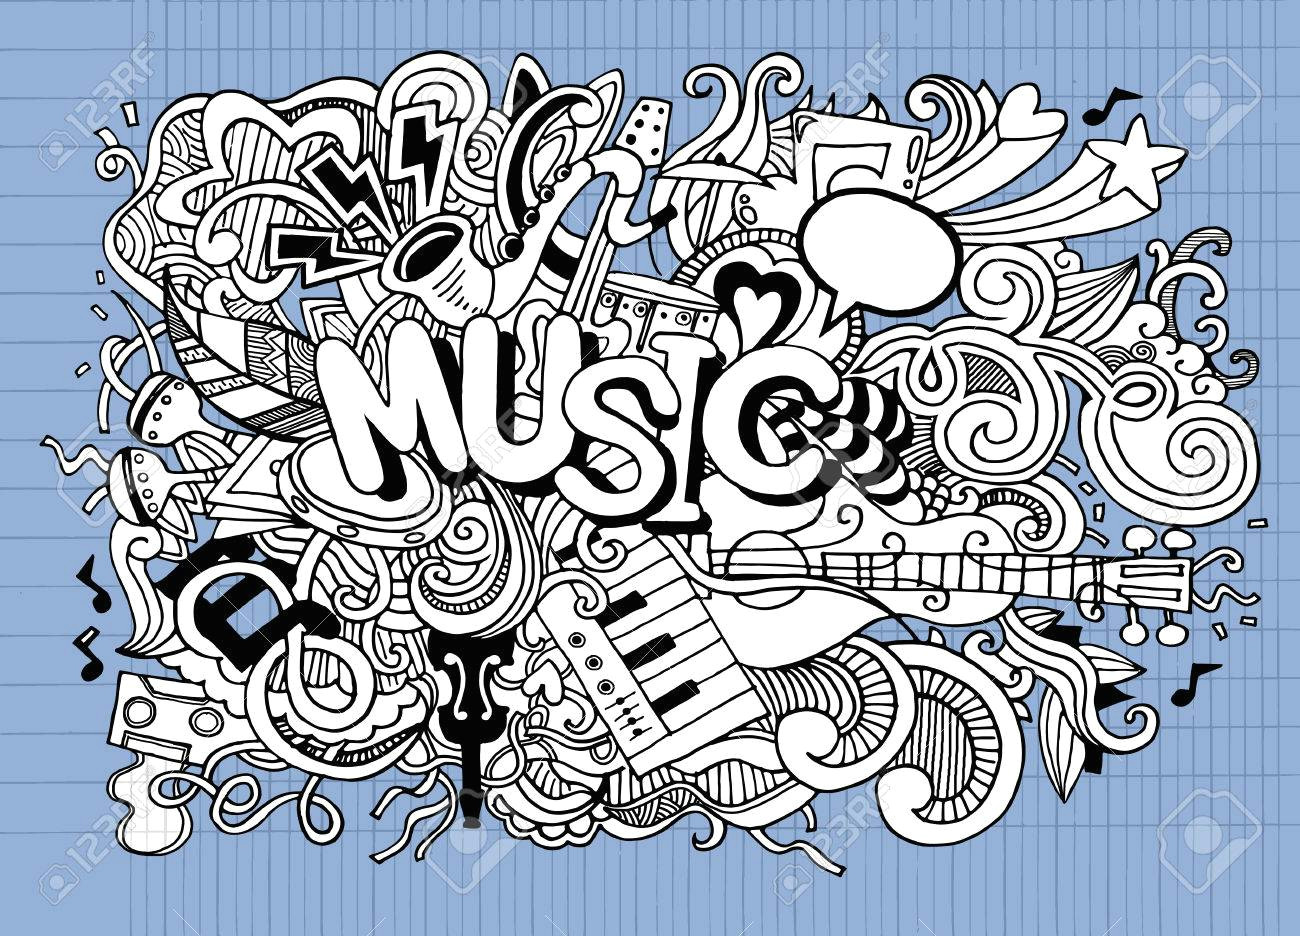 Drawings Of Hands Playing Instruments Abstract Music Background Collage with Musical Instruments Hand